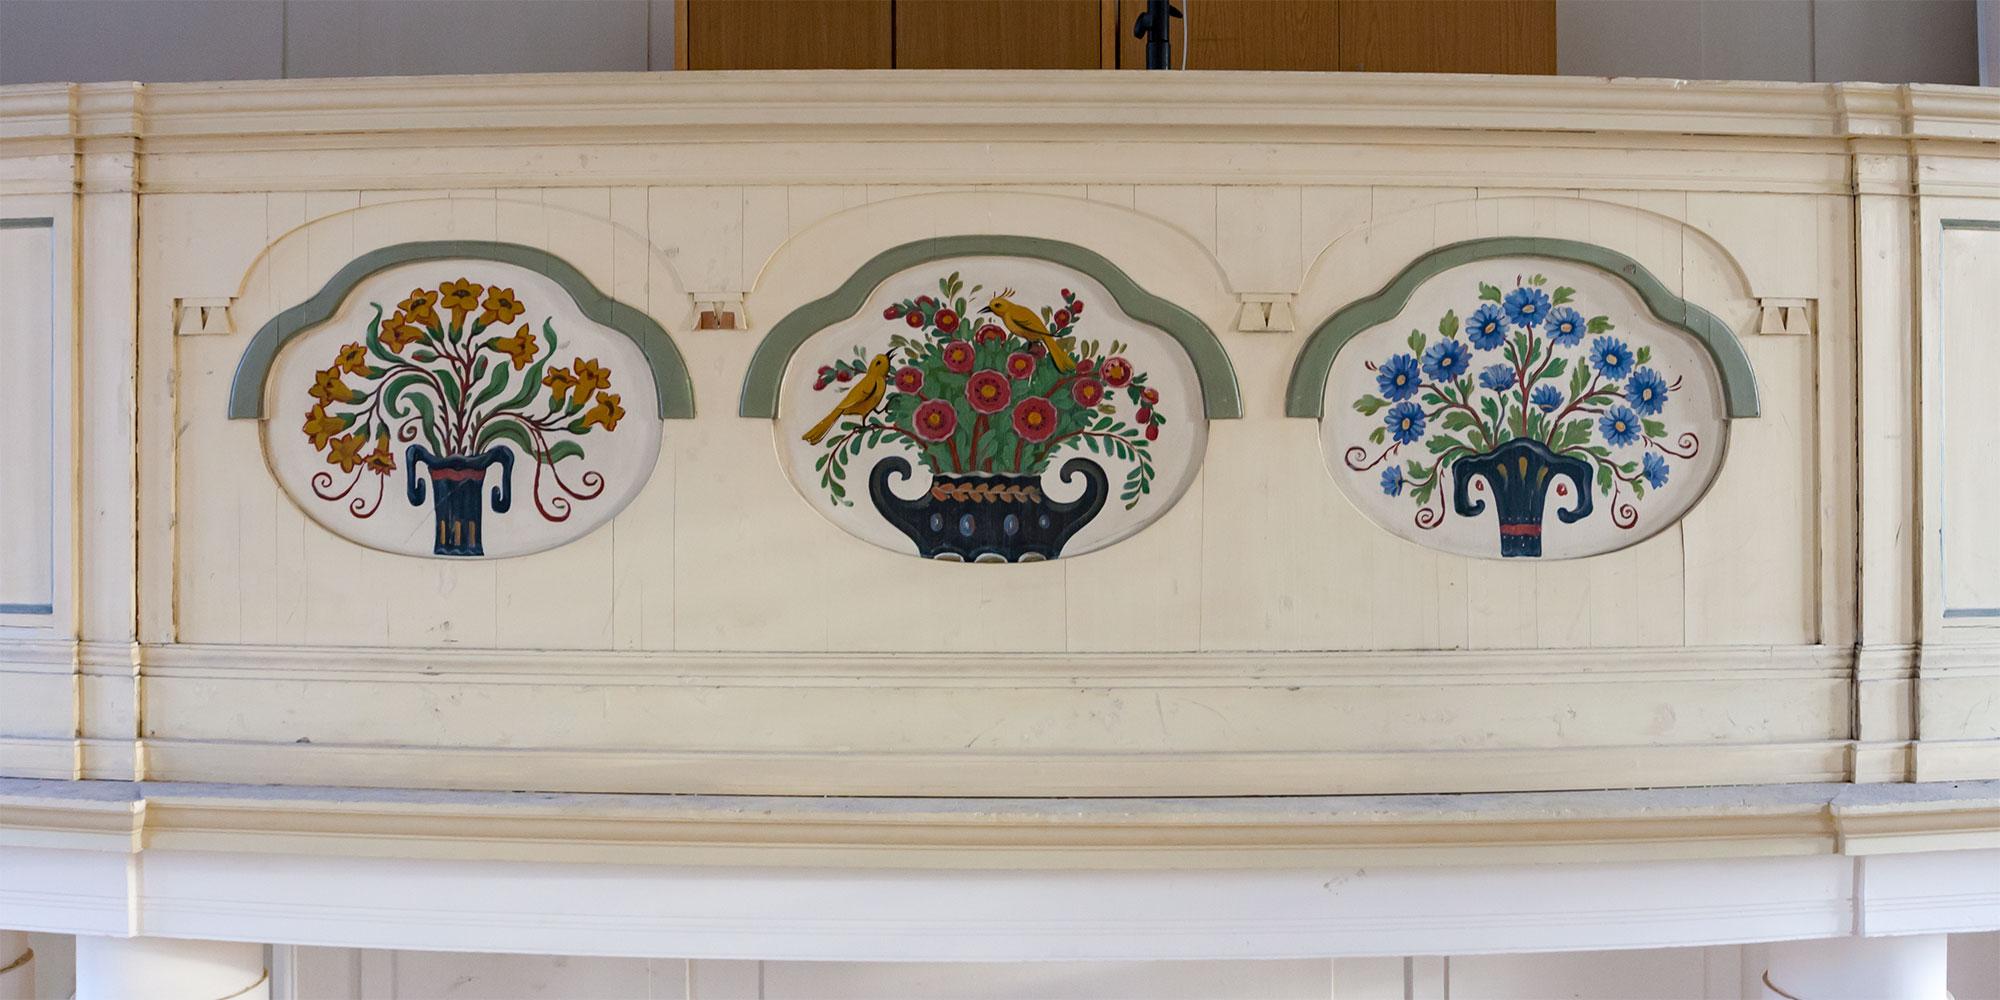 Rediscovered and professionally restored painting on the gallery of the assembly hall